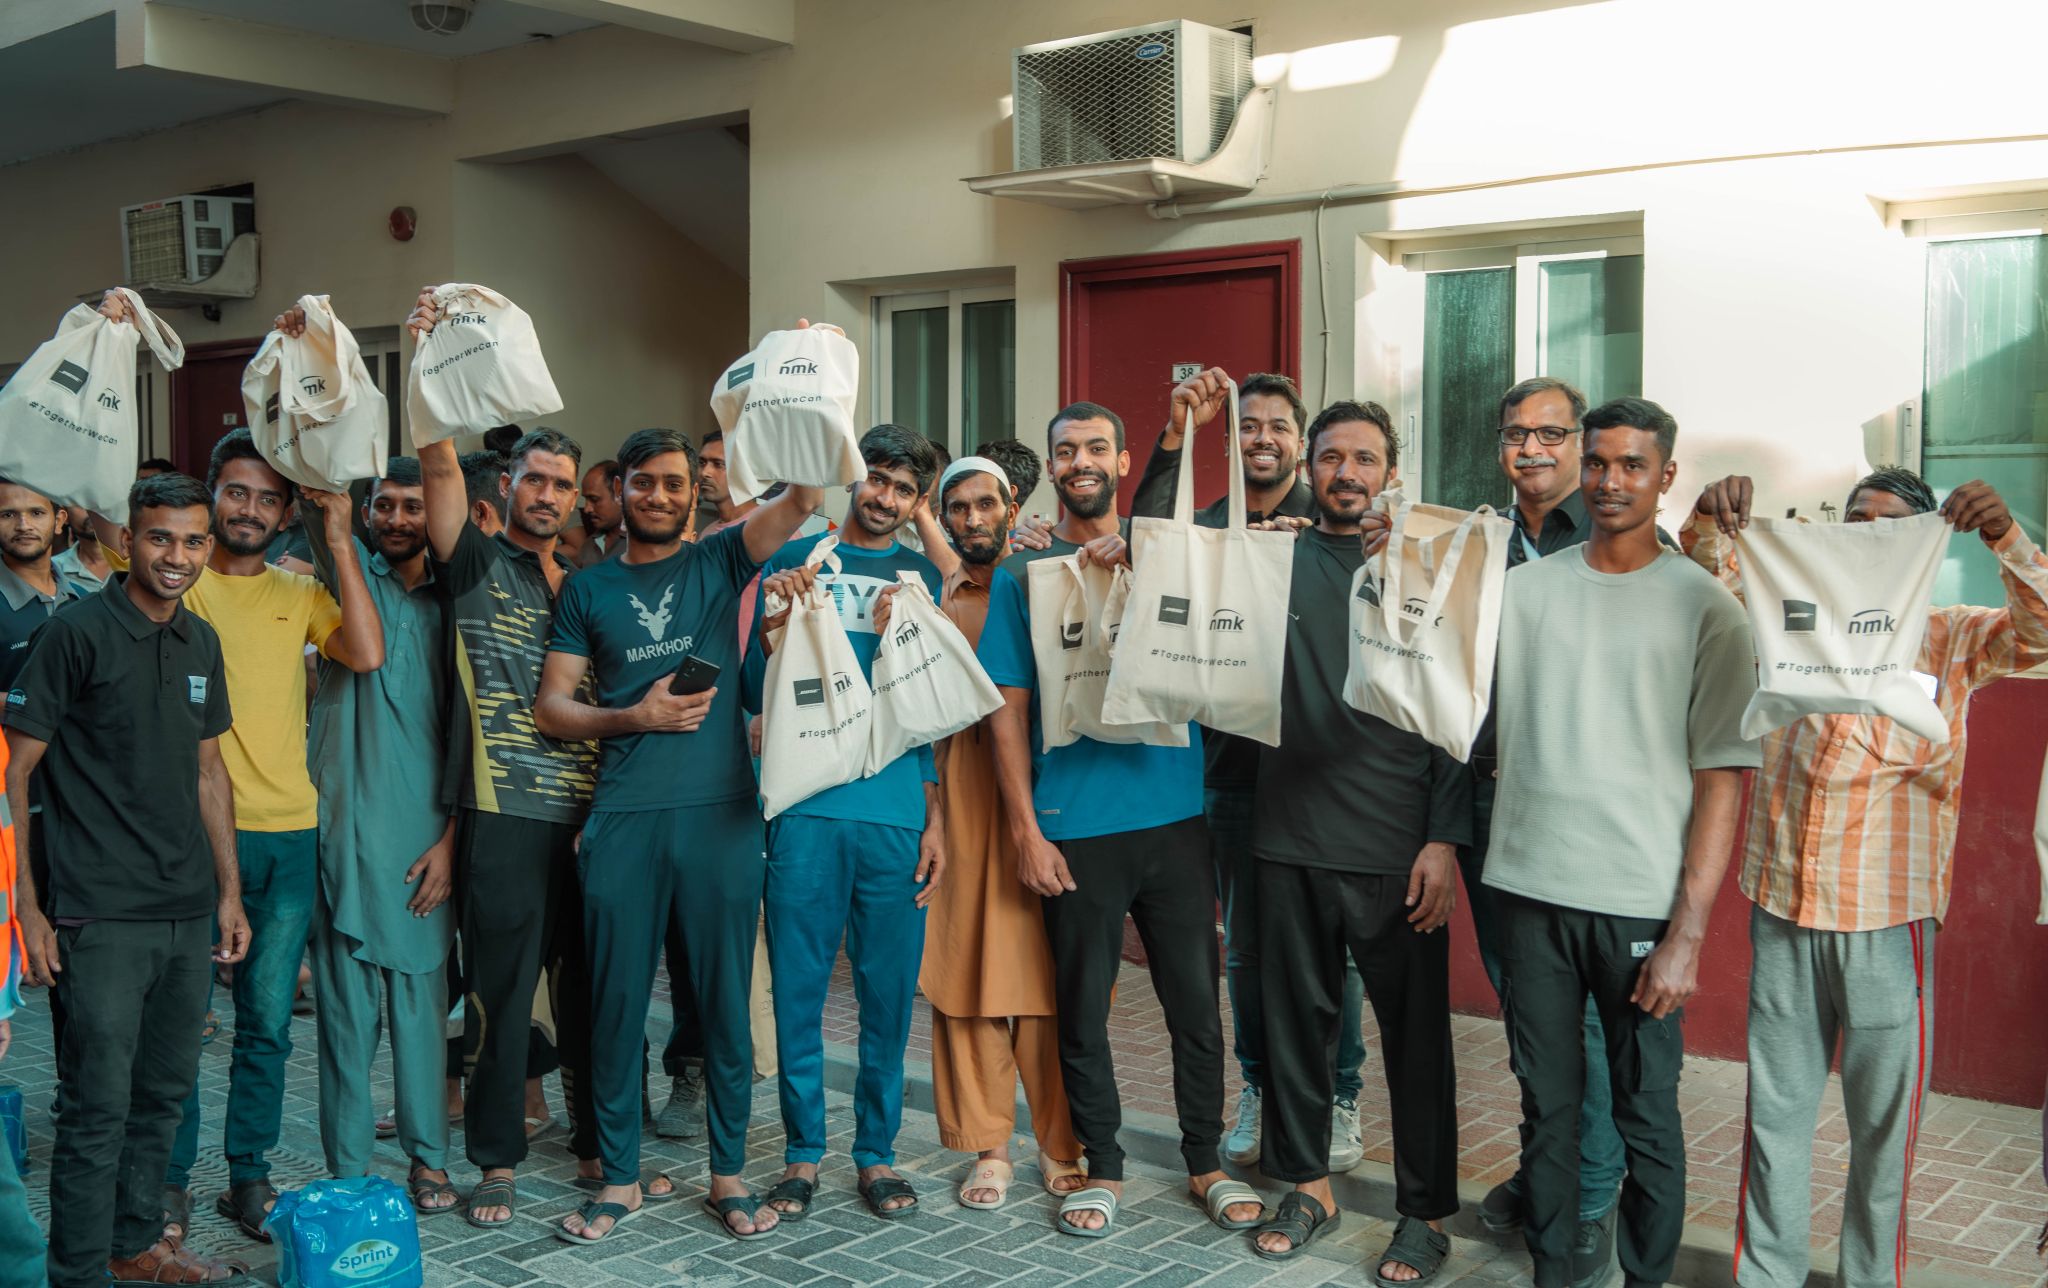 NMK Electronics Extends Compassion and Support Through Ramadan Meal Distribution Initiative - News